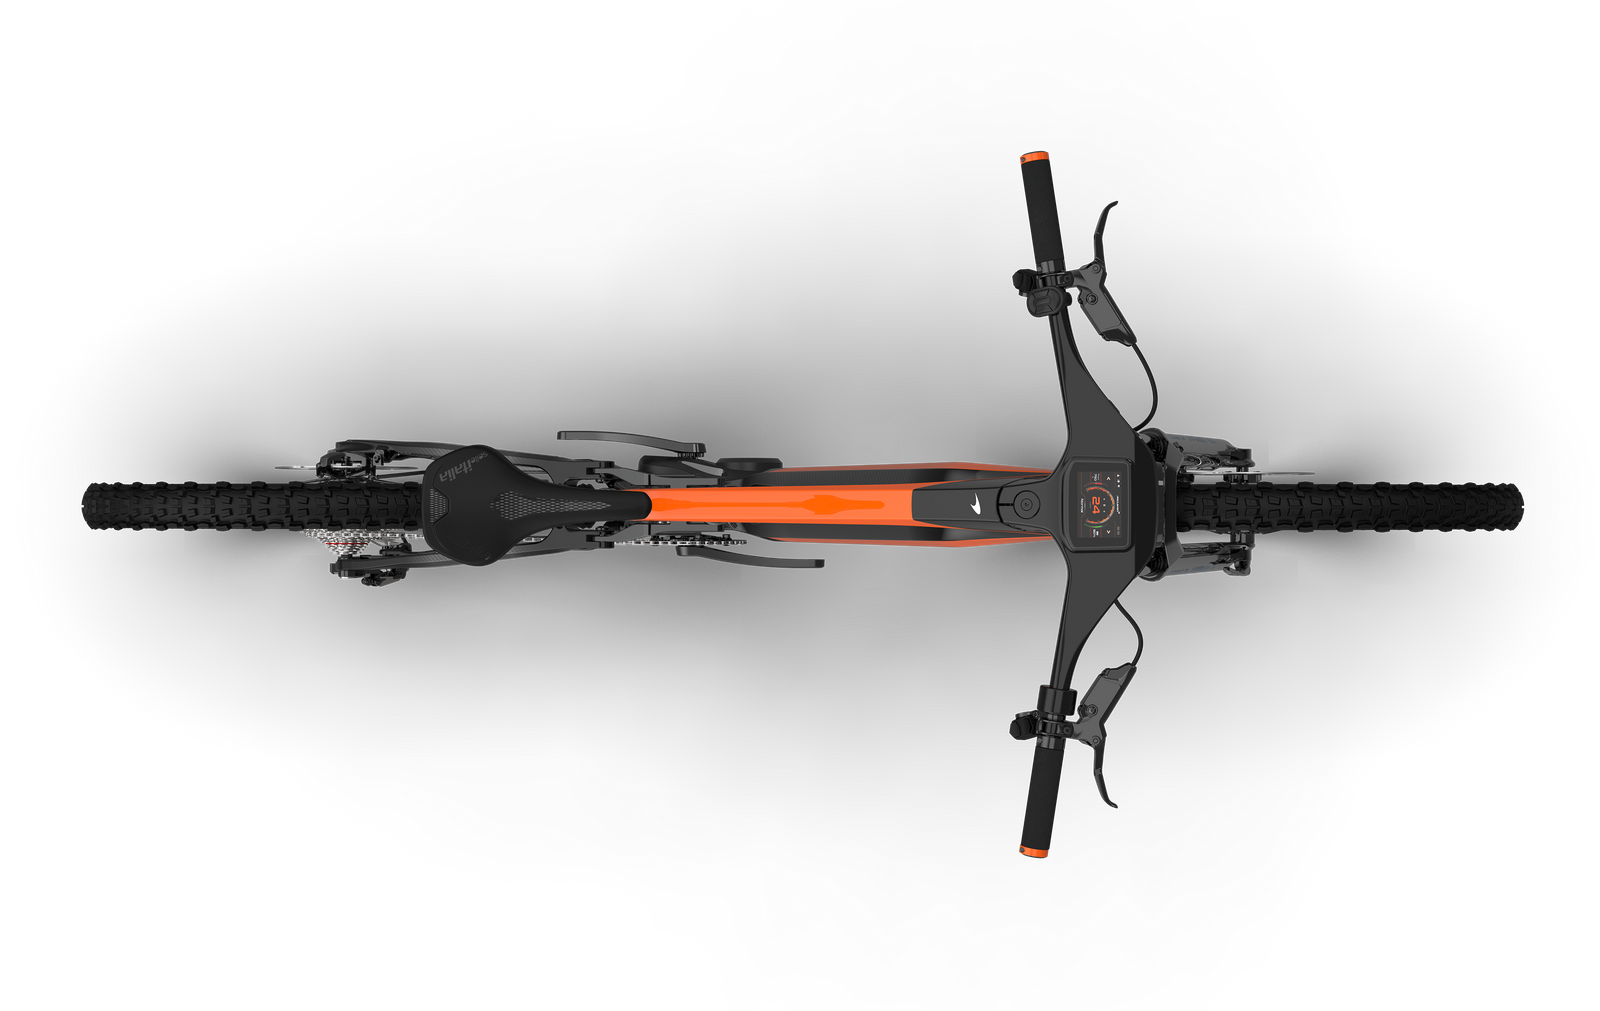 Overhead view of the McLaren Extreme 160mm front and 145mm rear suspension eMTB, clearly showing the usage of McLaren's core brand color of mango orange on the top tube and aluminum grip clamps.  